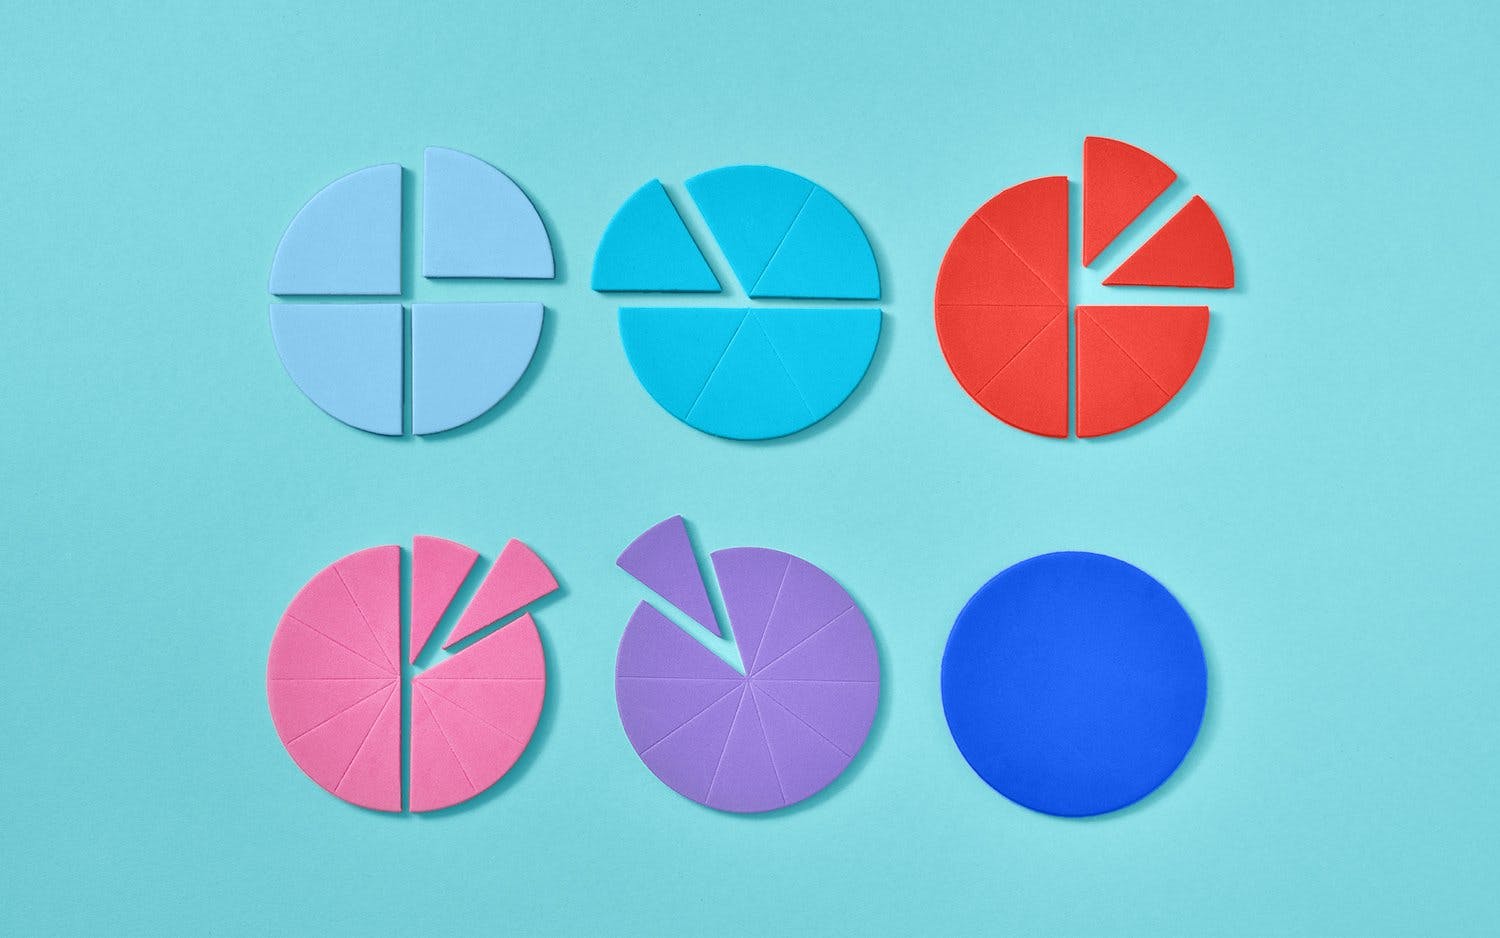 different colored pie charts of different sizes